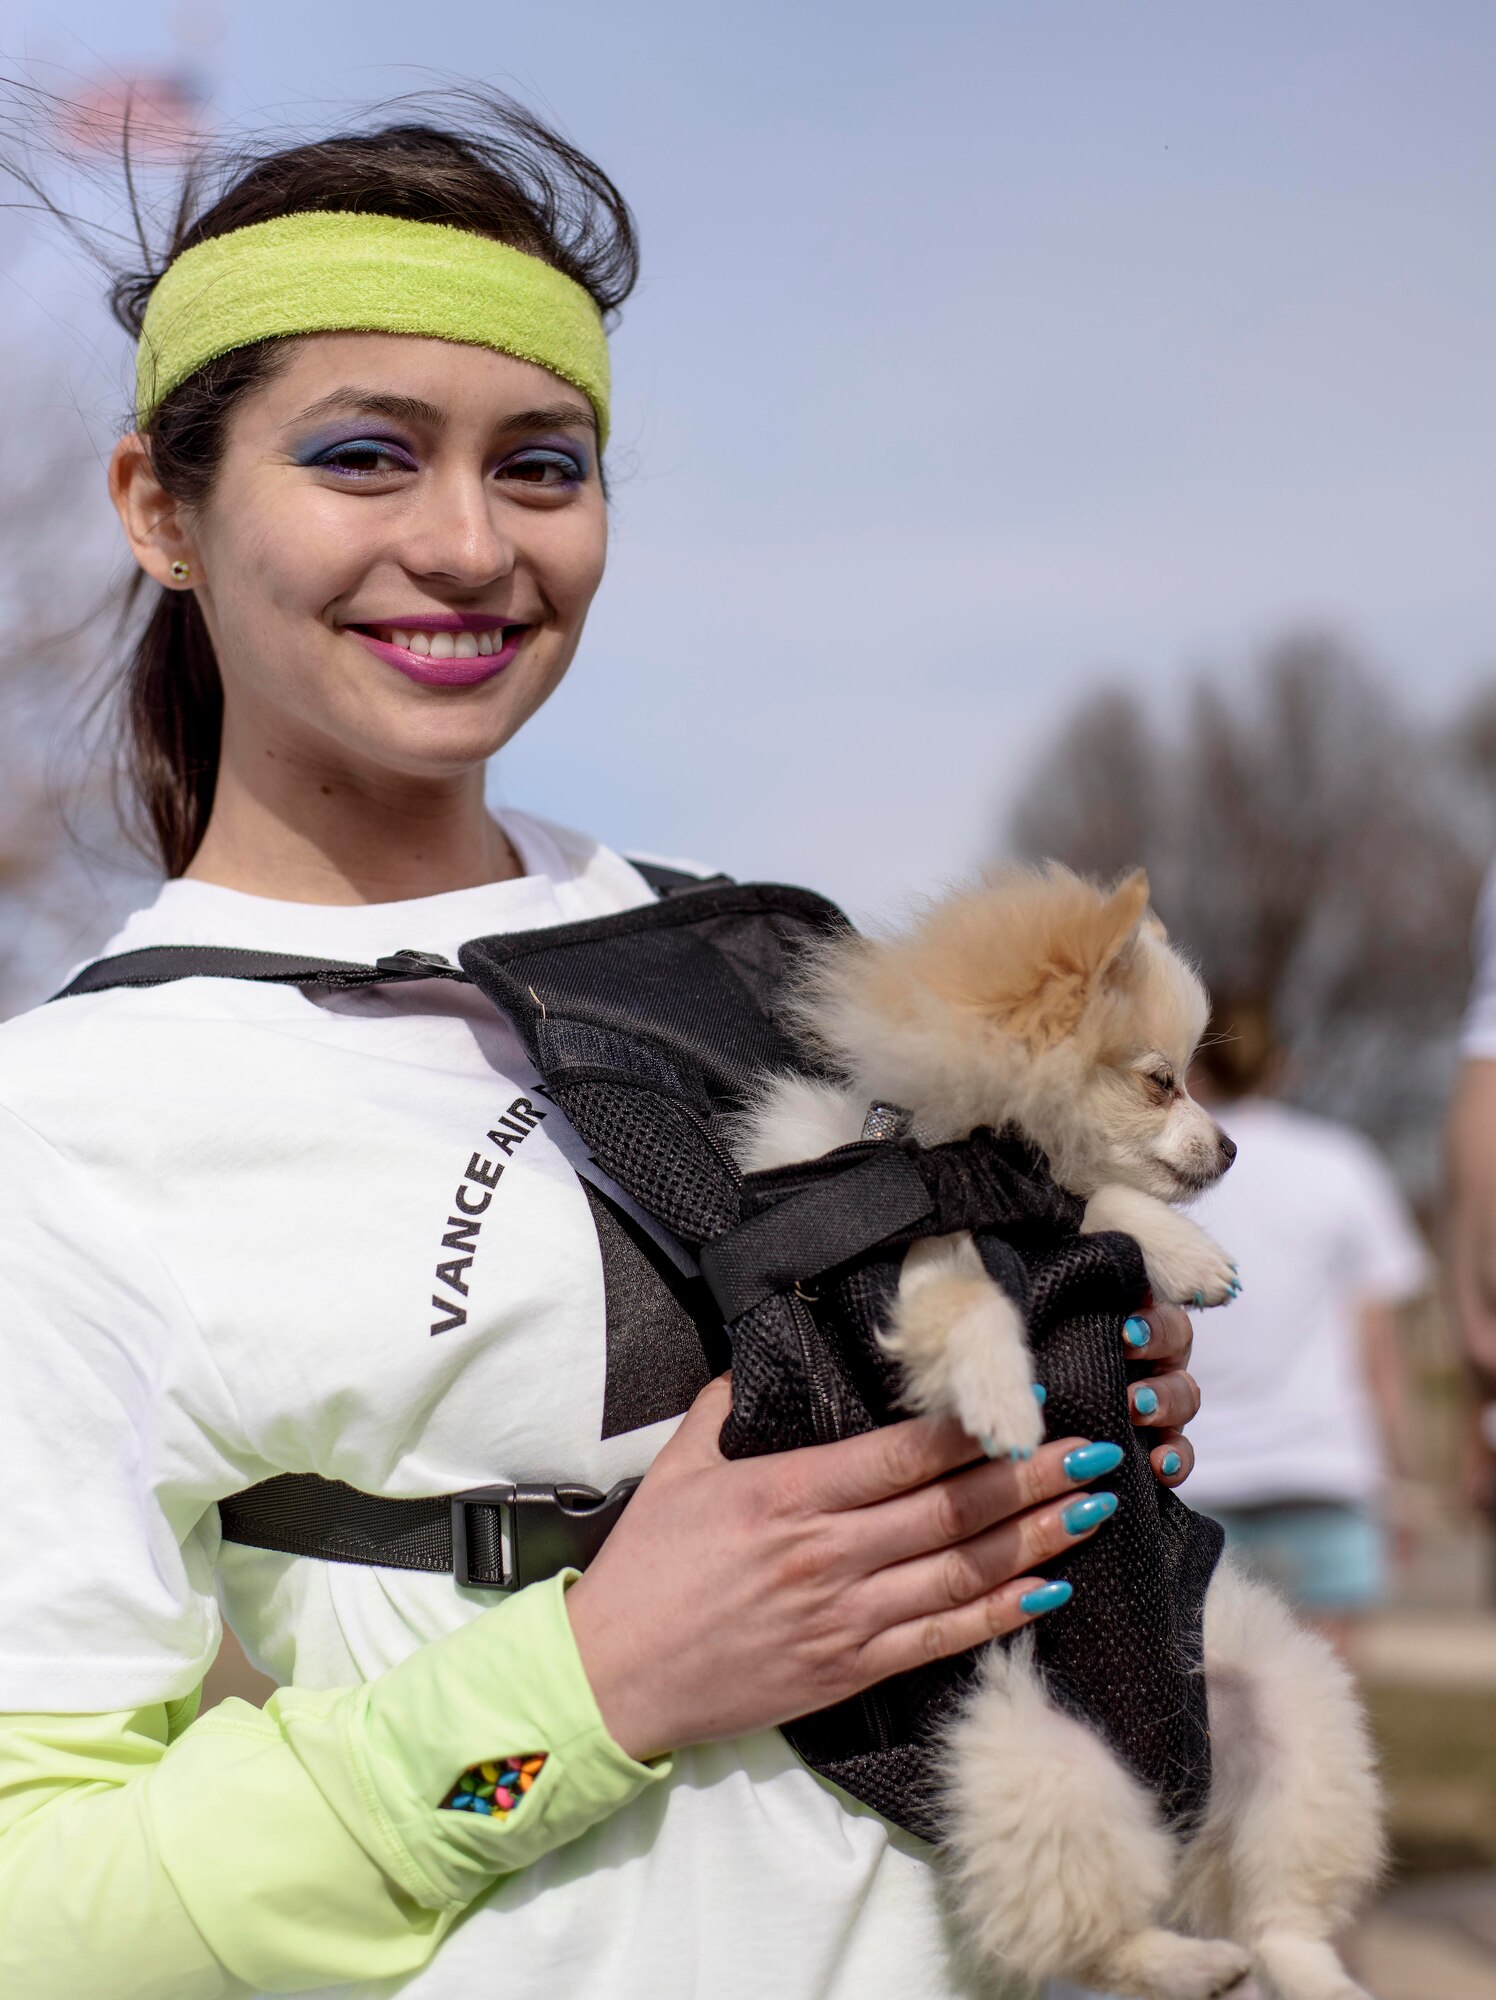 Senior Airman Jovanna Flor and her furry friend at the  base's first ever color run, March 14. More than 200 runners and volunteers colored Vance in support of the Air Force Assistance Fund. (U.S. Air Force photo / David Poe)

